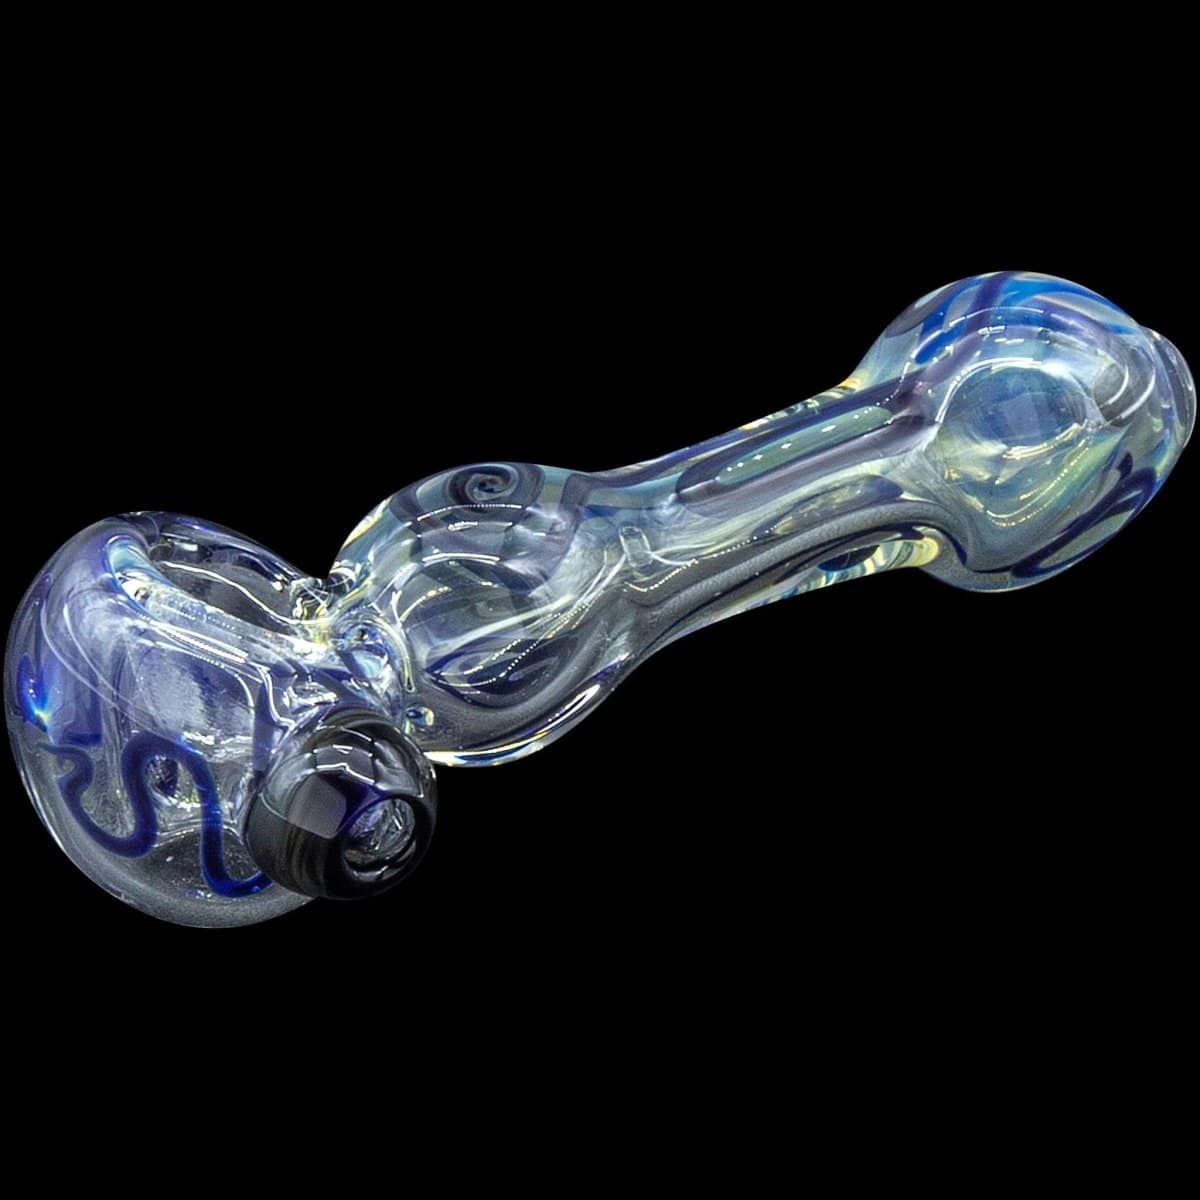 LA Pipes Hand Pipe "Painted Warrior Spoon" Glass Pipe